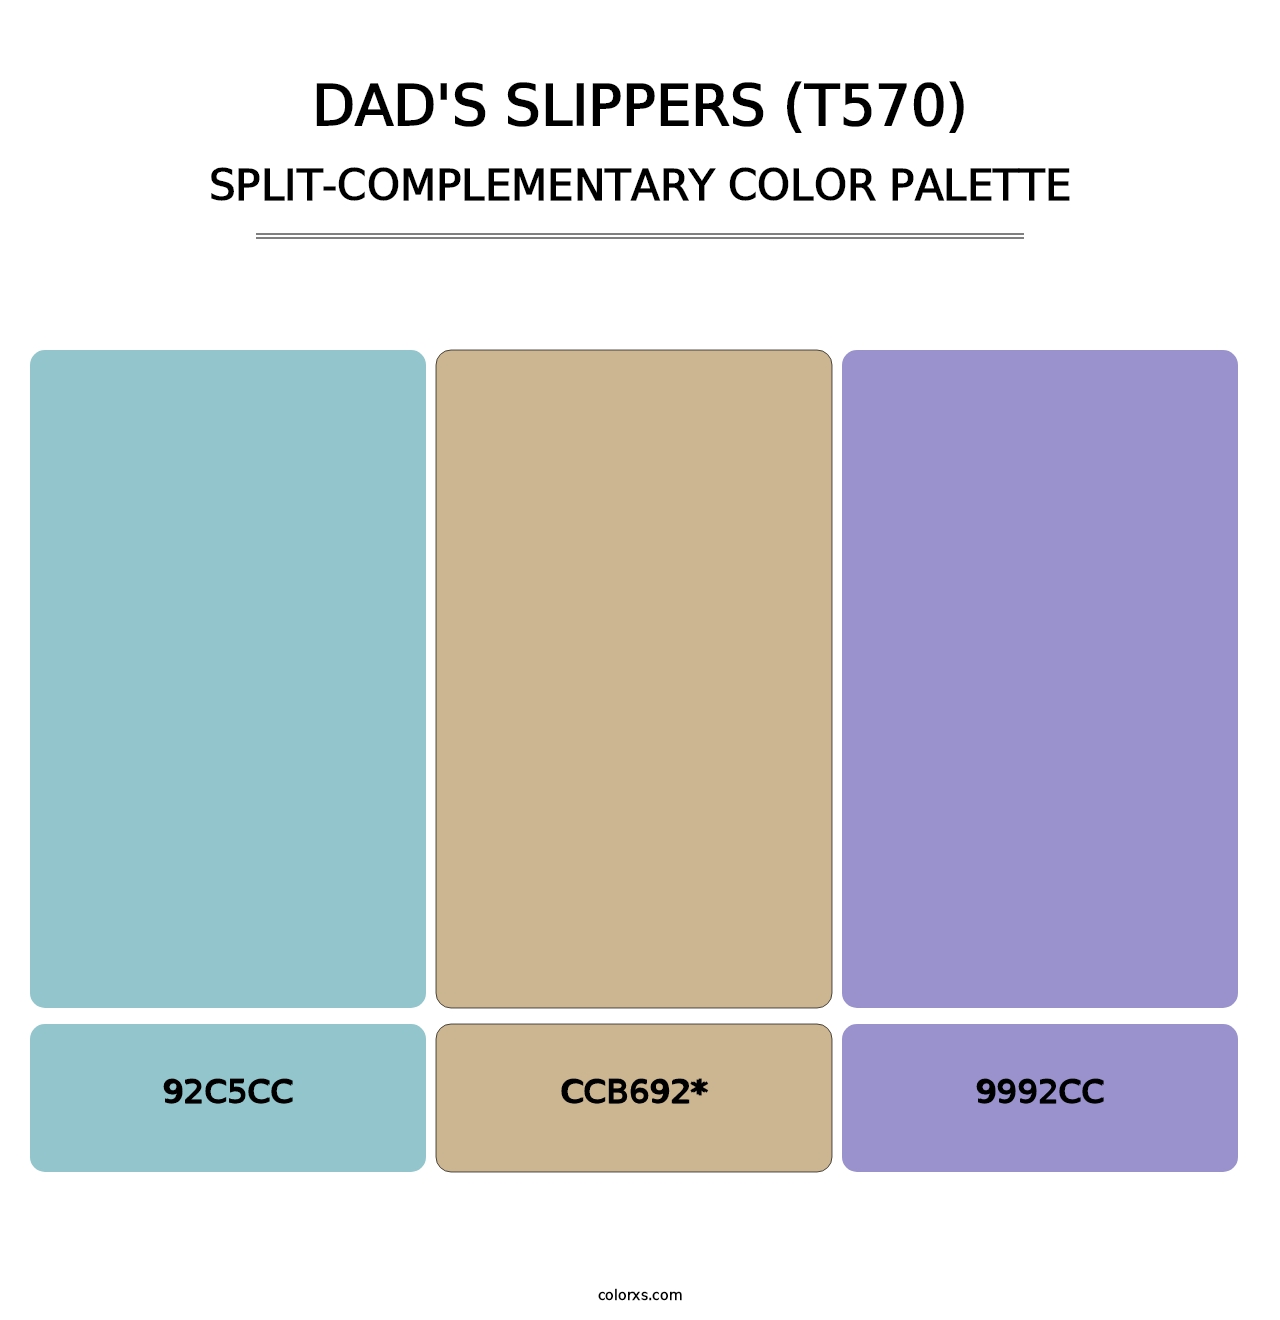 Dad's Slippers (T570) - Split-Complementary Color Palette